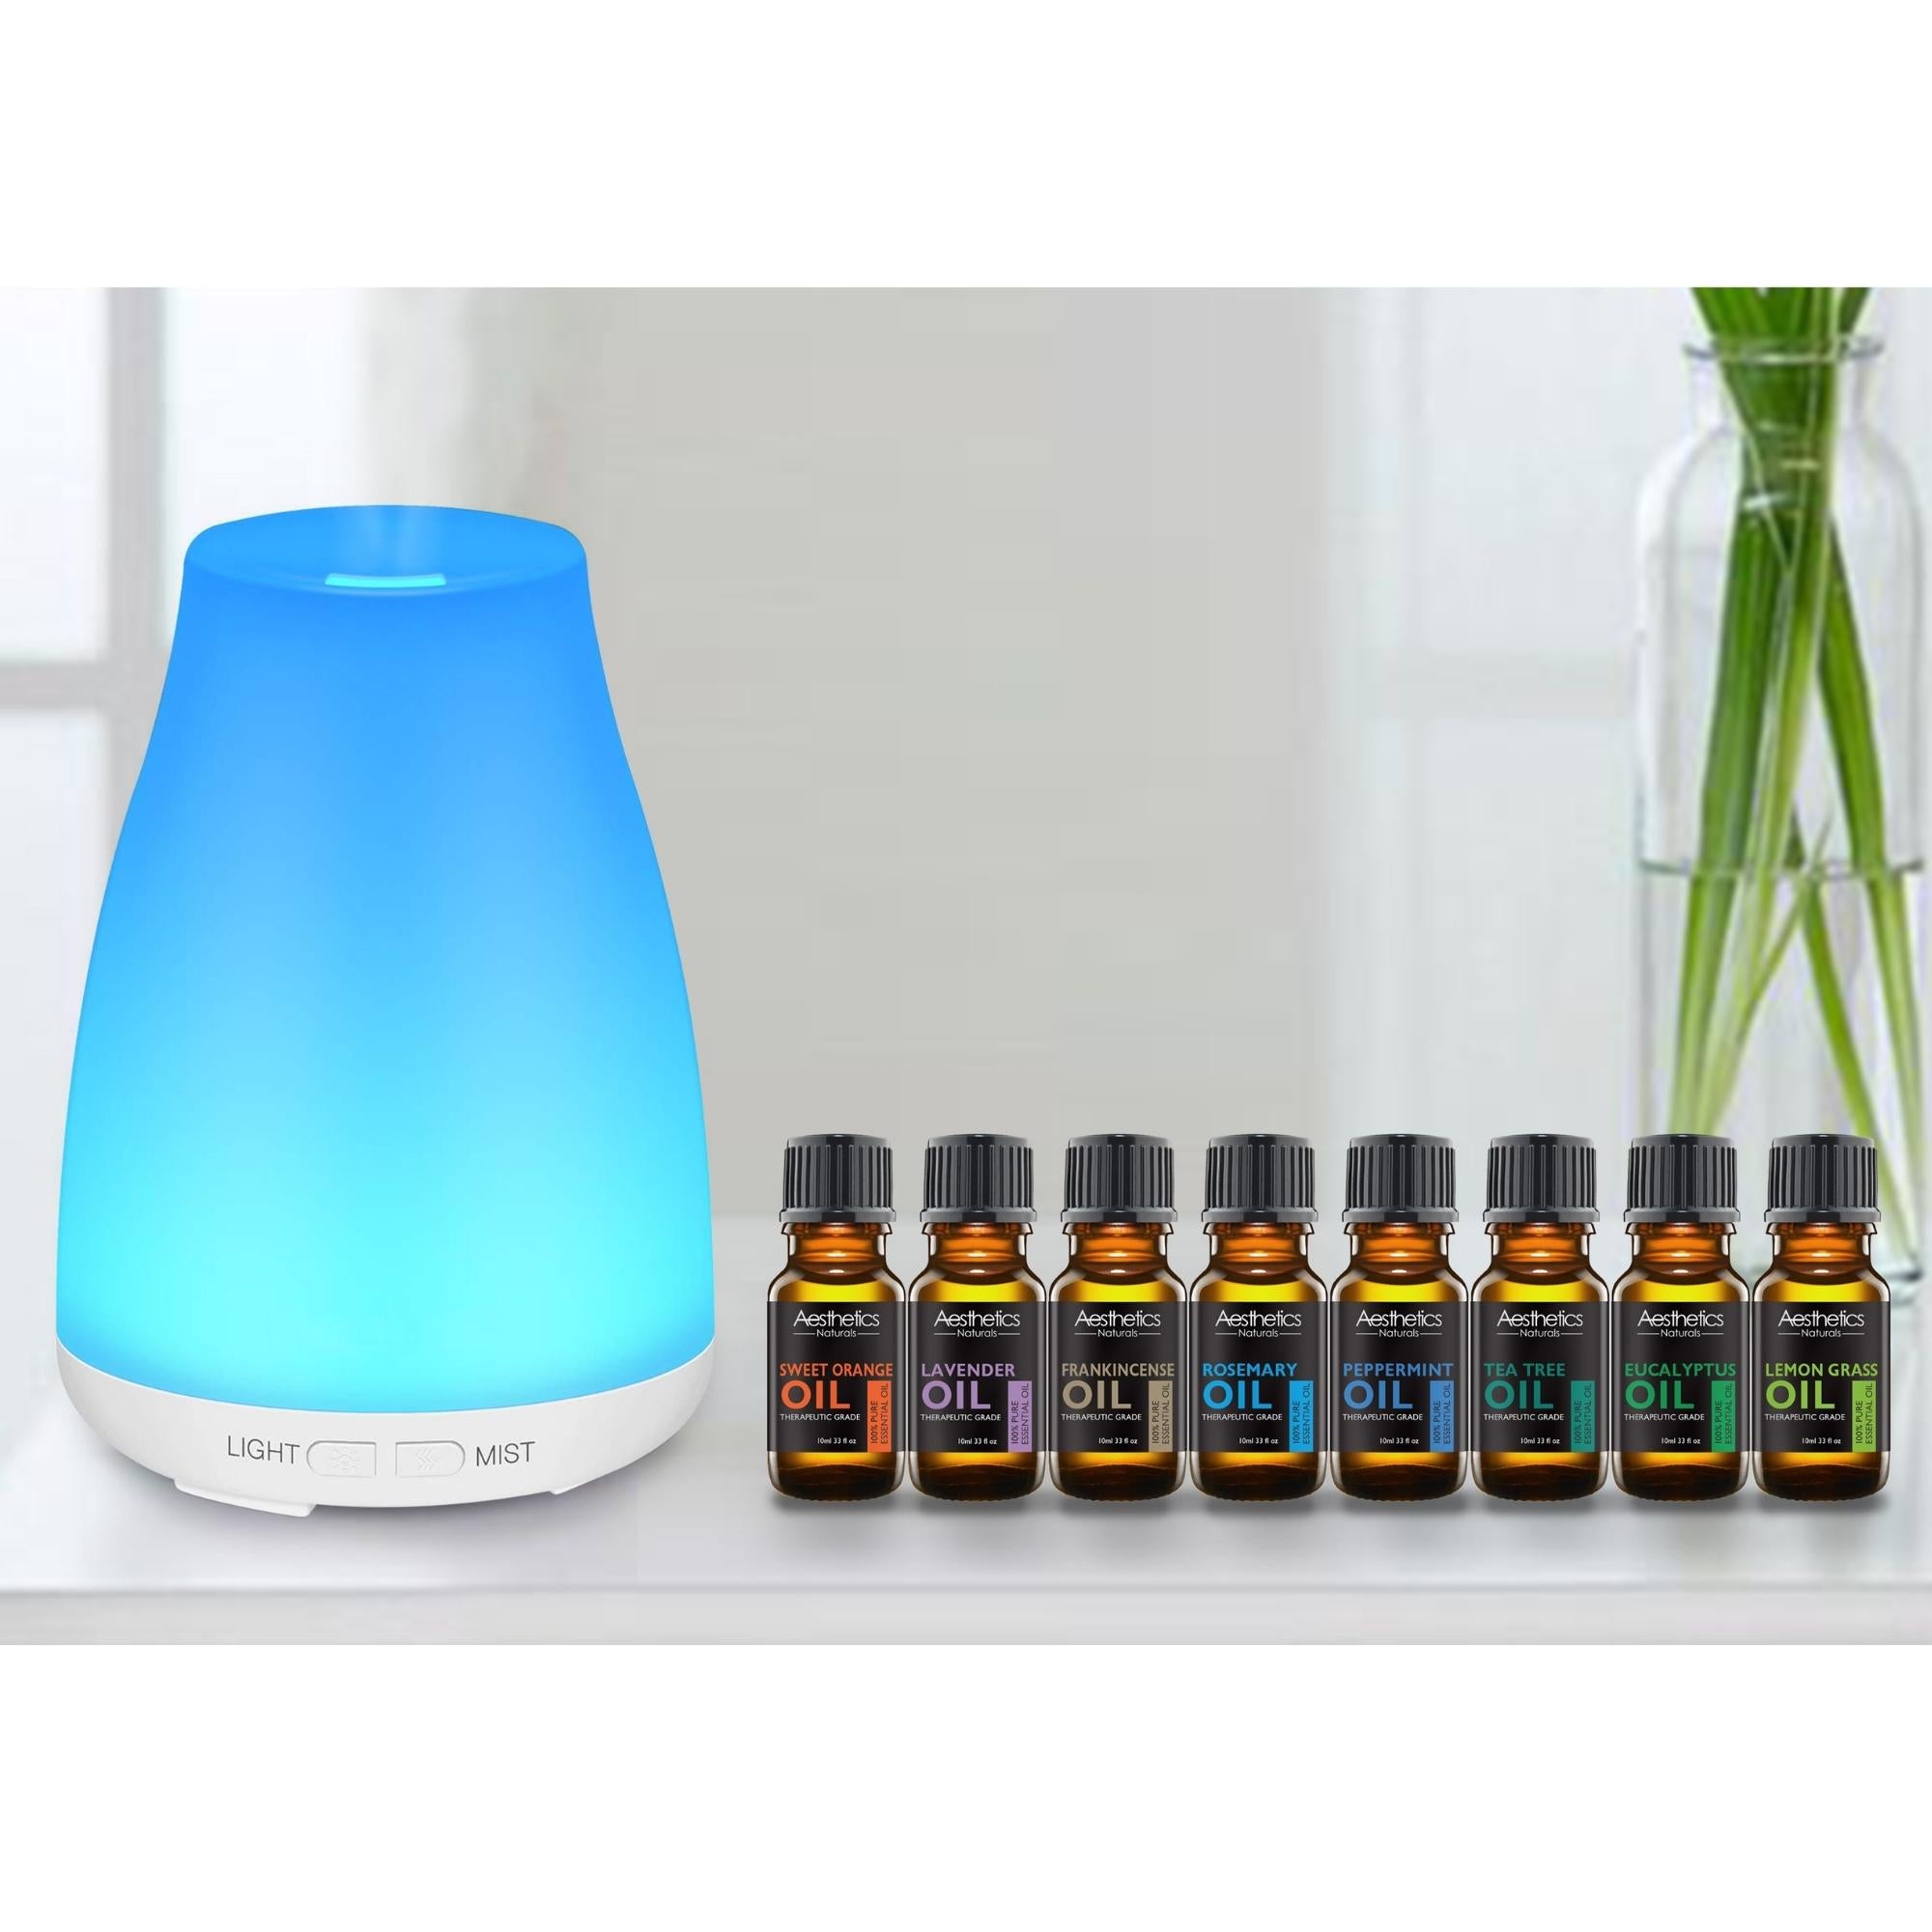 Aesthetics Ultrasonic Aroma-Diffusing Humidifier with Essential Oils